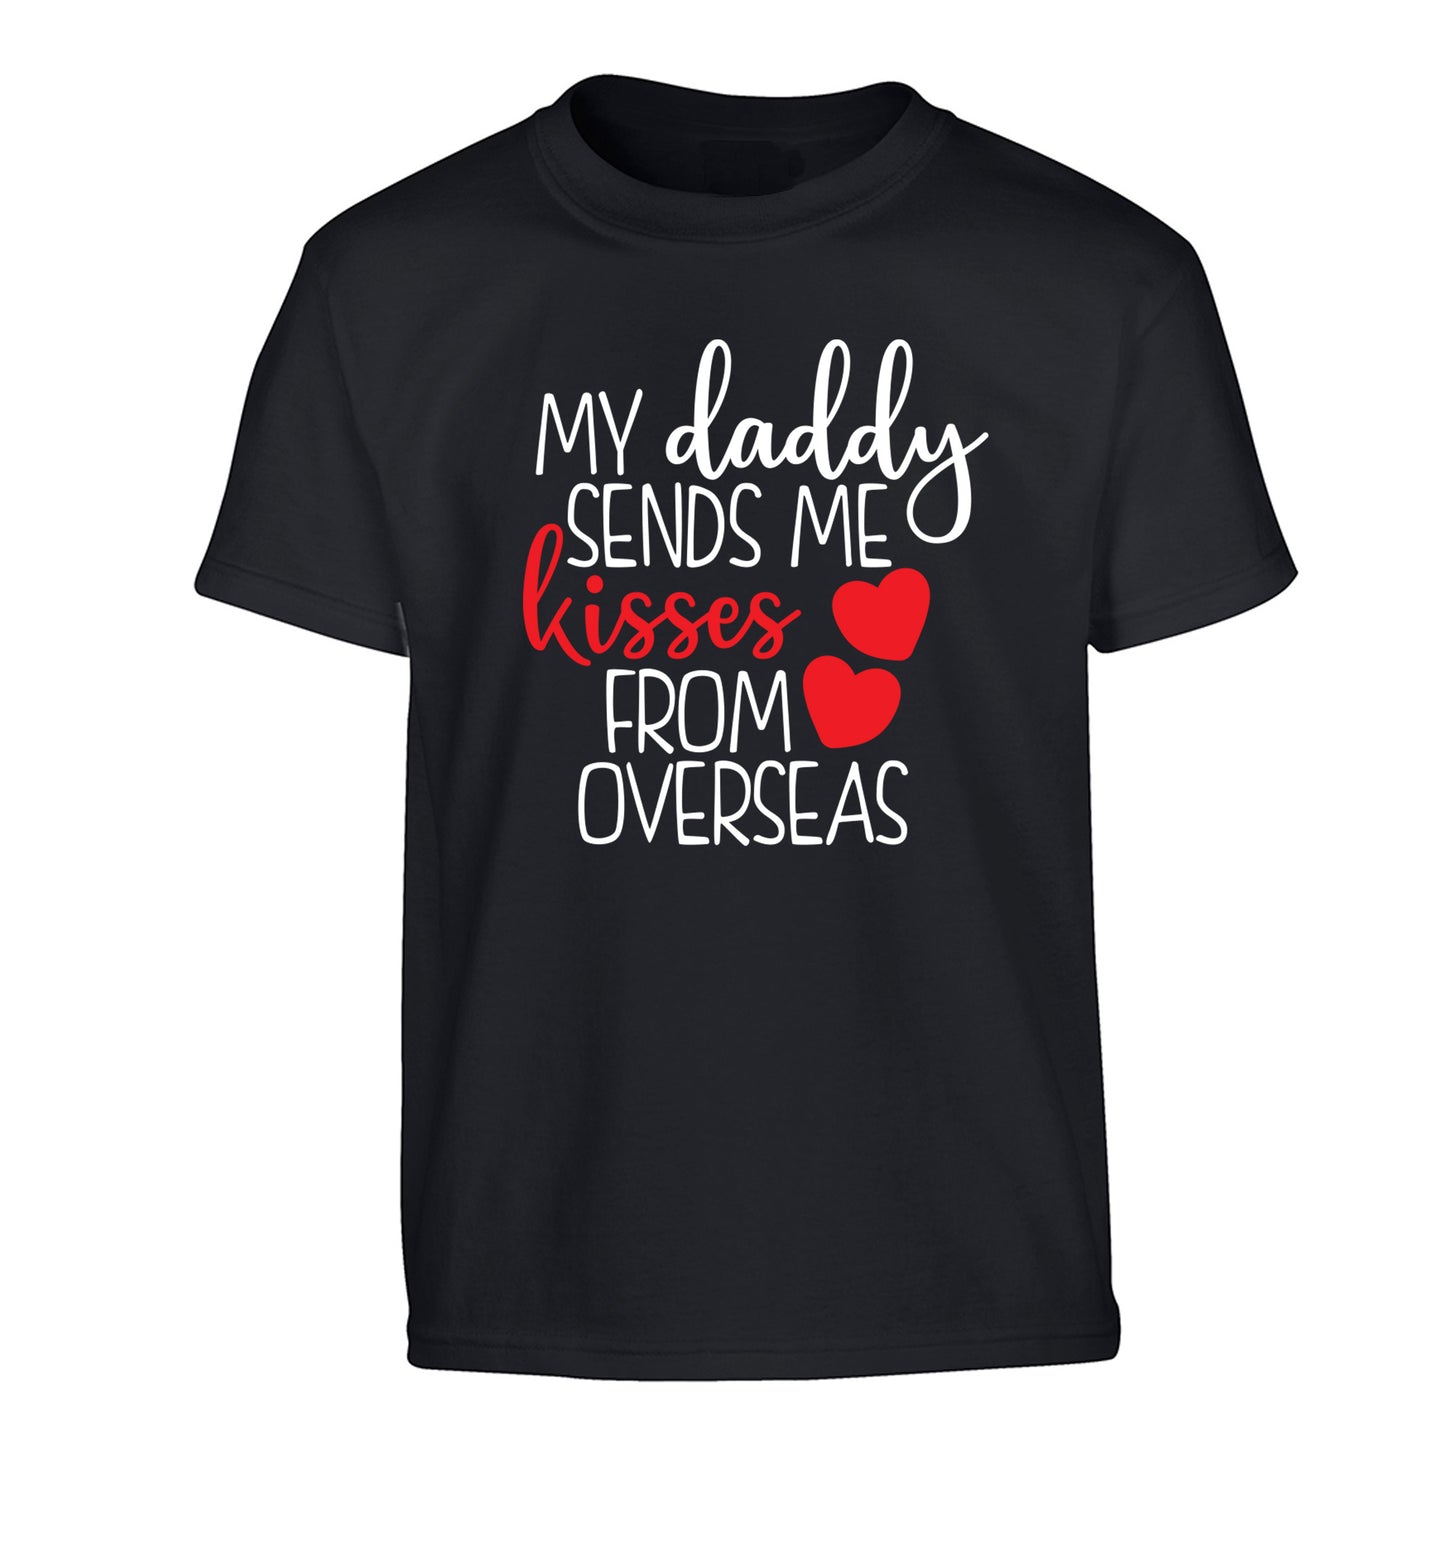 My daddy sends me kisses from overseas Children's black Tshirt 12-13 Years